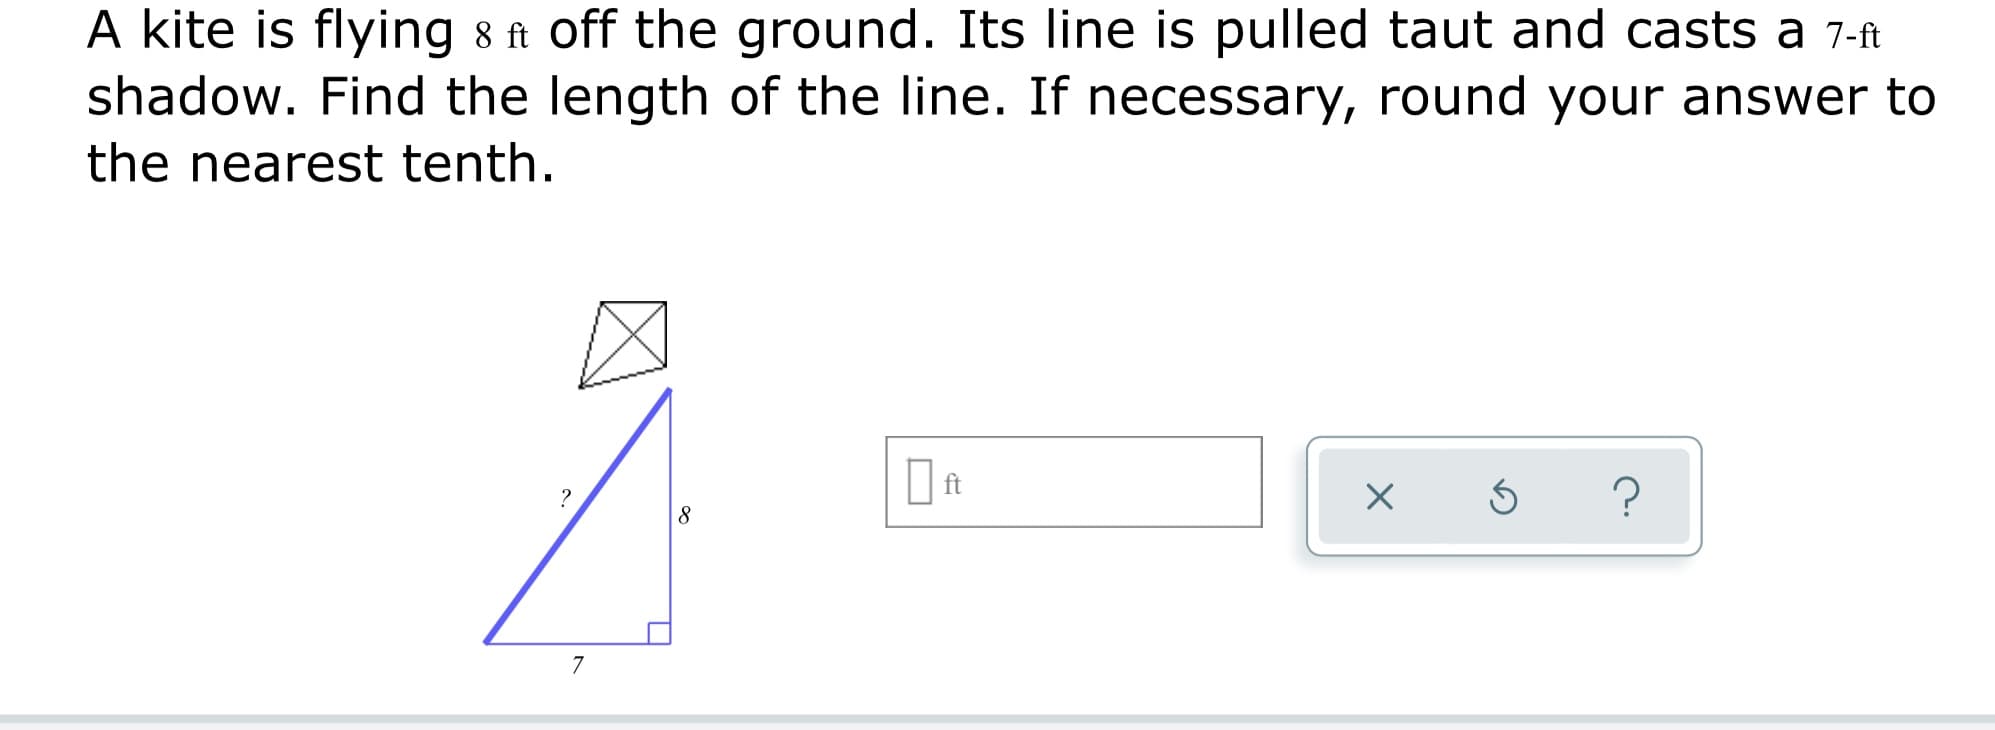 A kite is flying 8 ft off the ground. Its line is pulled taut and casts a 7-ft
shadow. Find the length of the line. If necessary, round your answer to
the nearest tenth.
| ft
